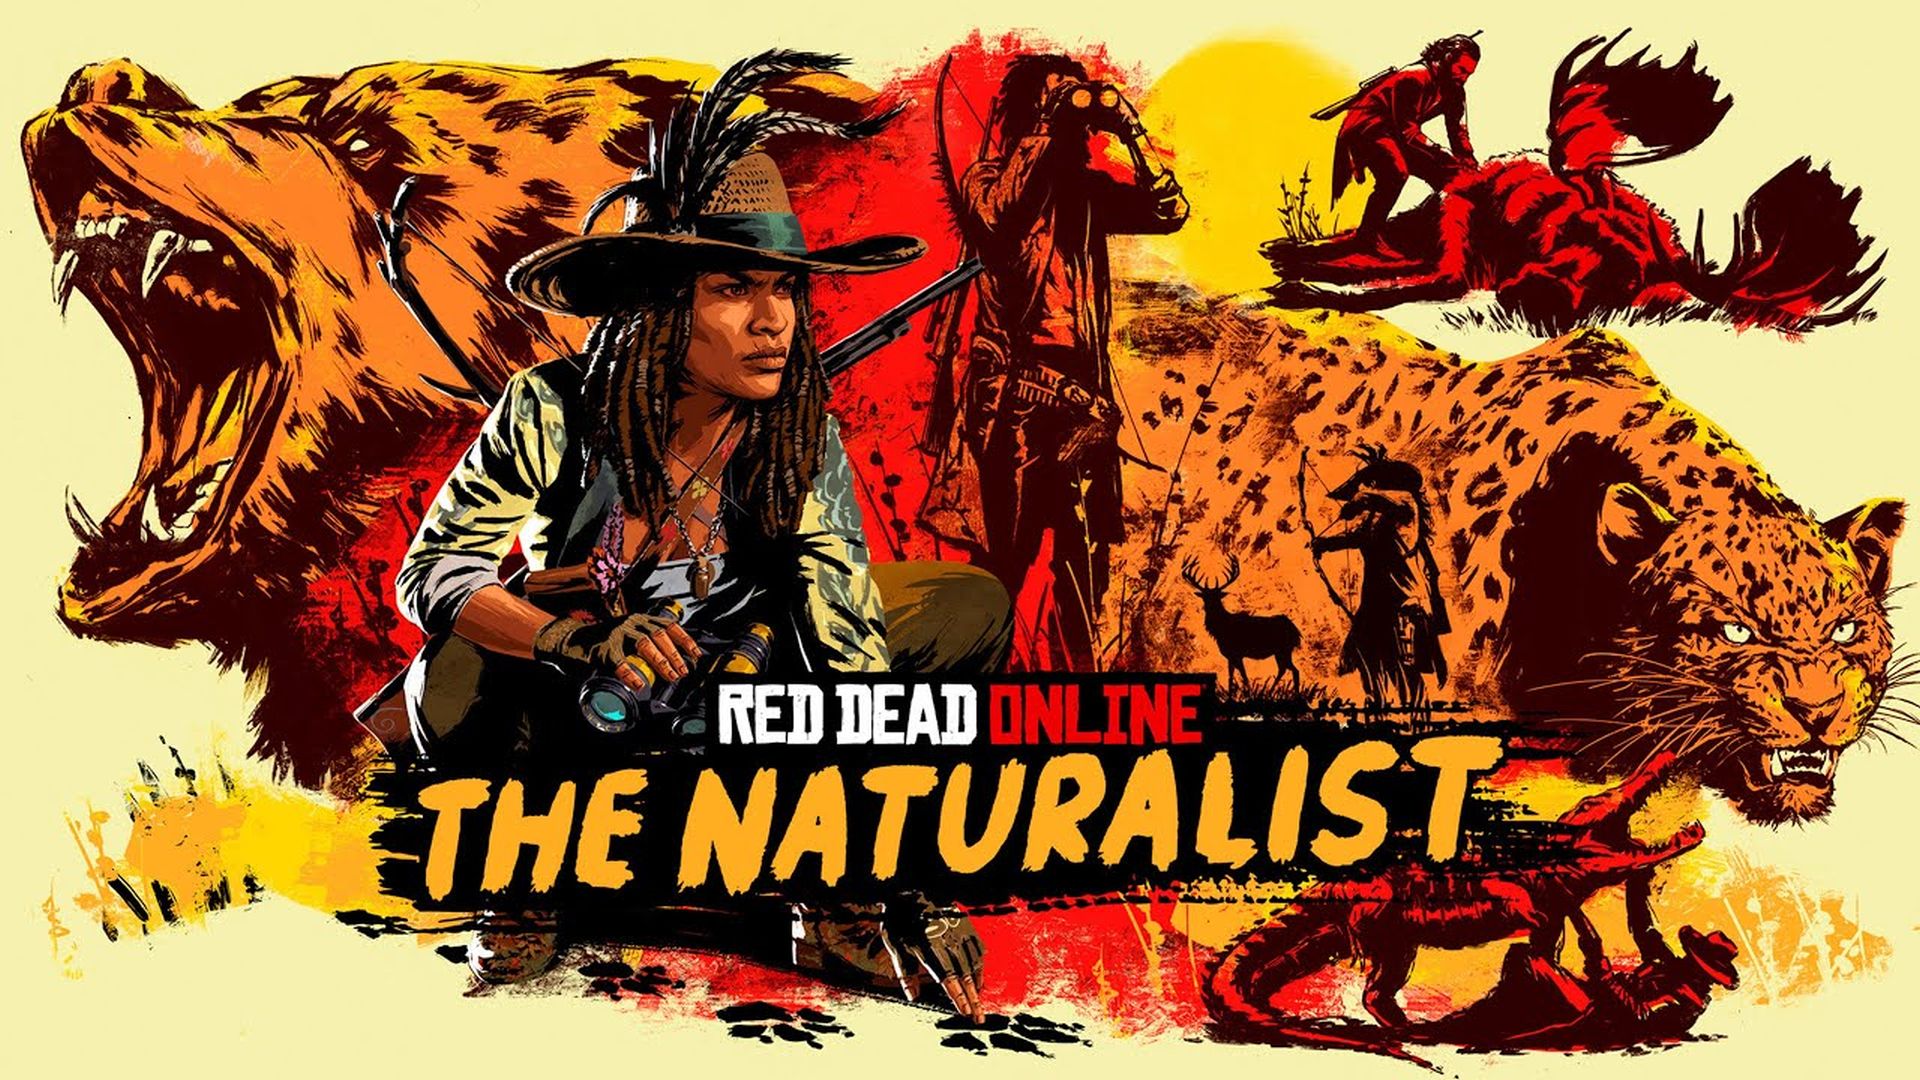 Red Dead Online - The Naturalist